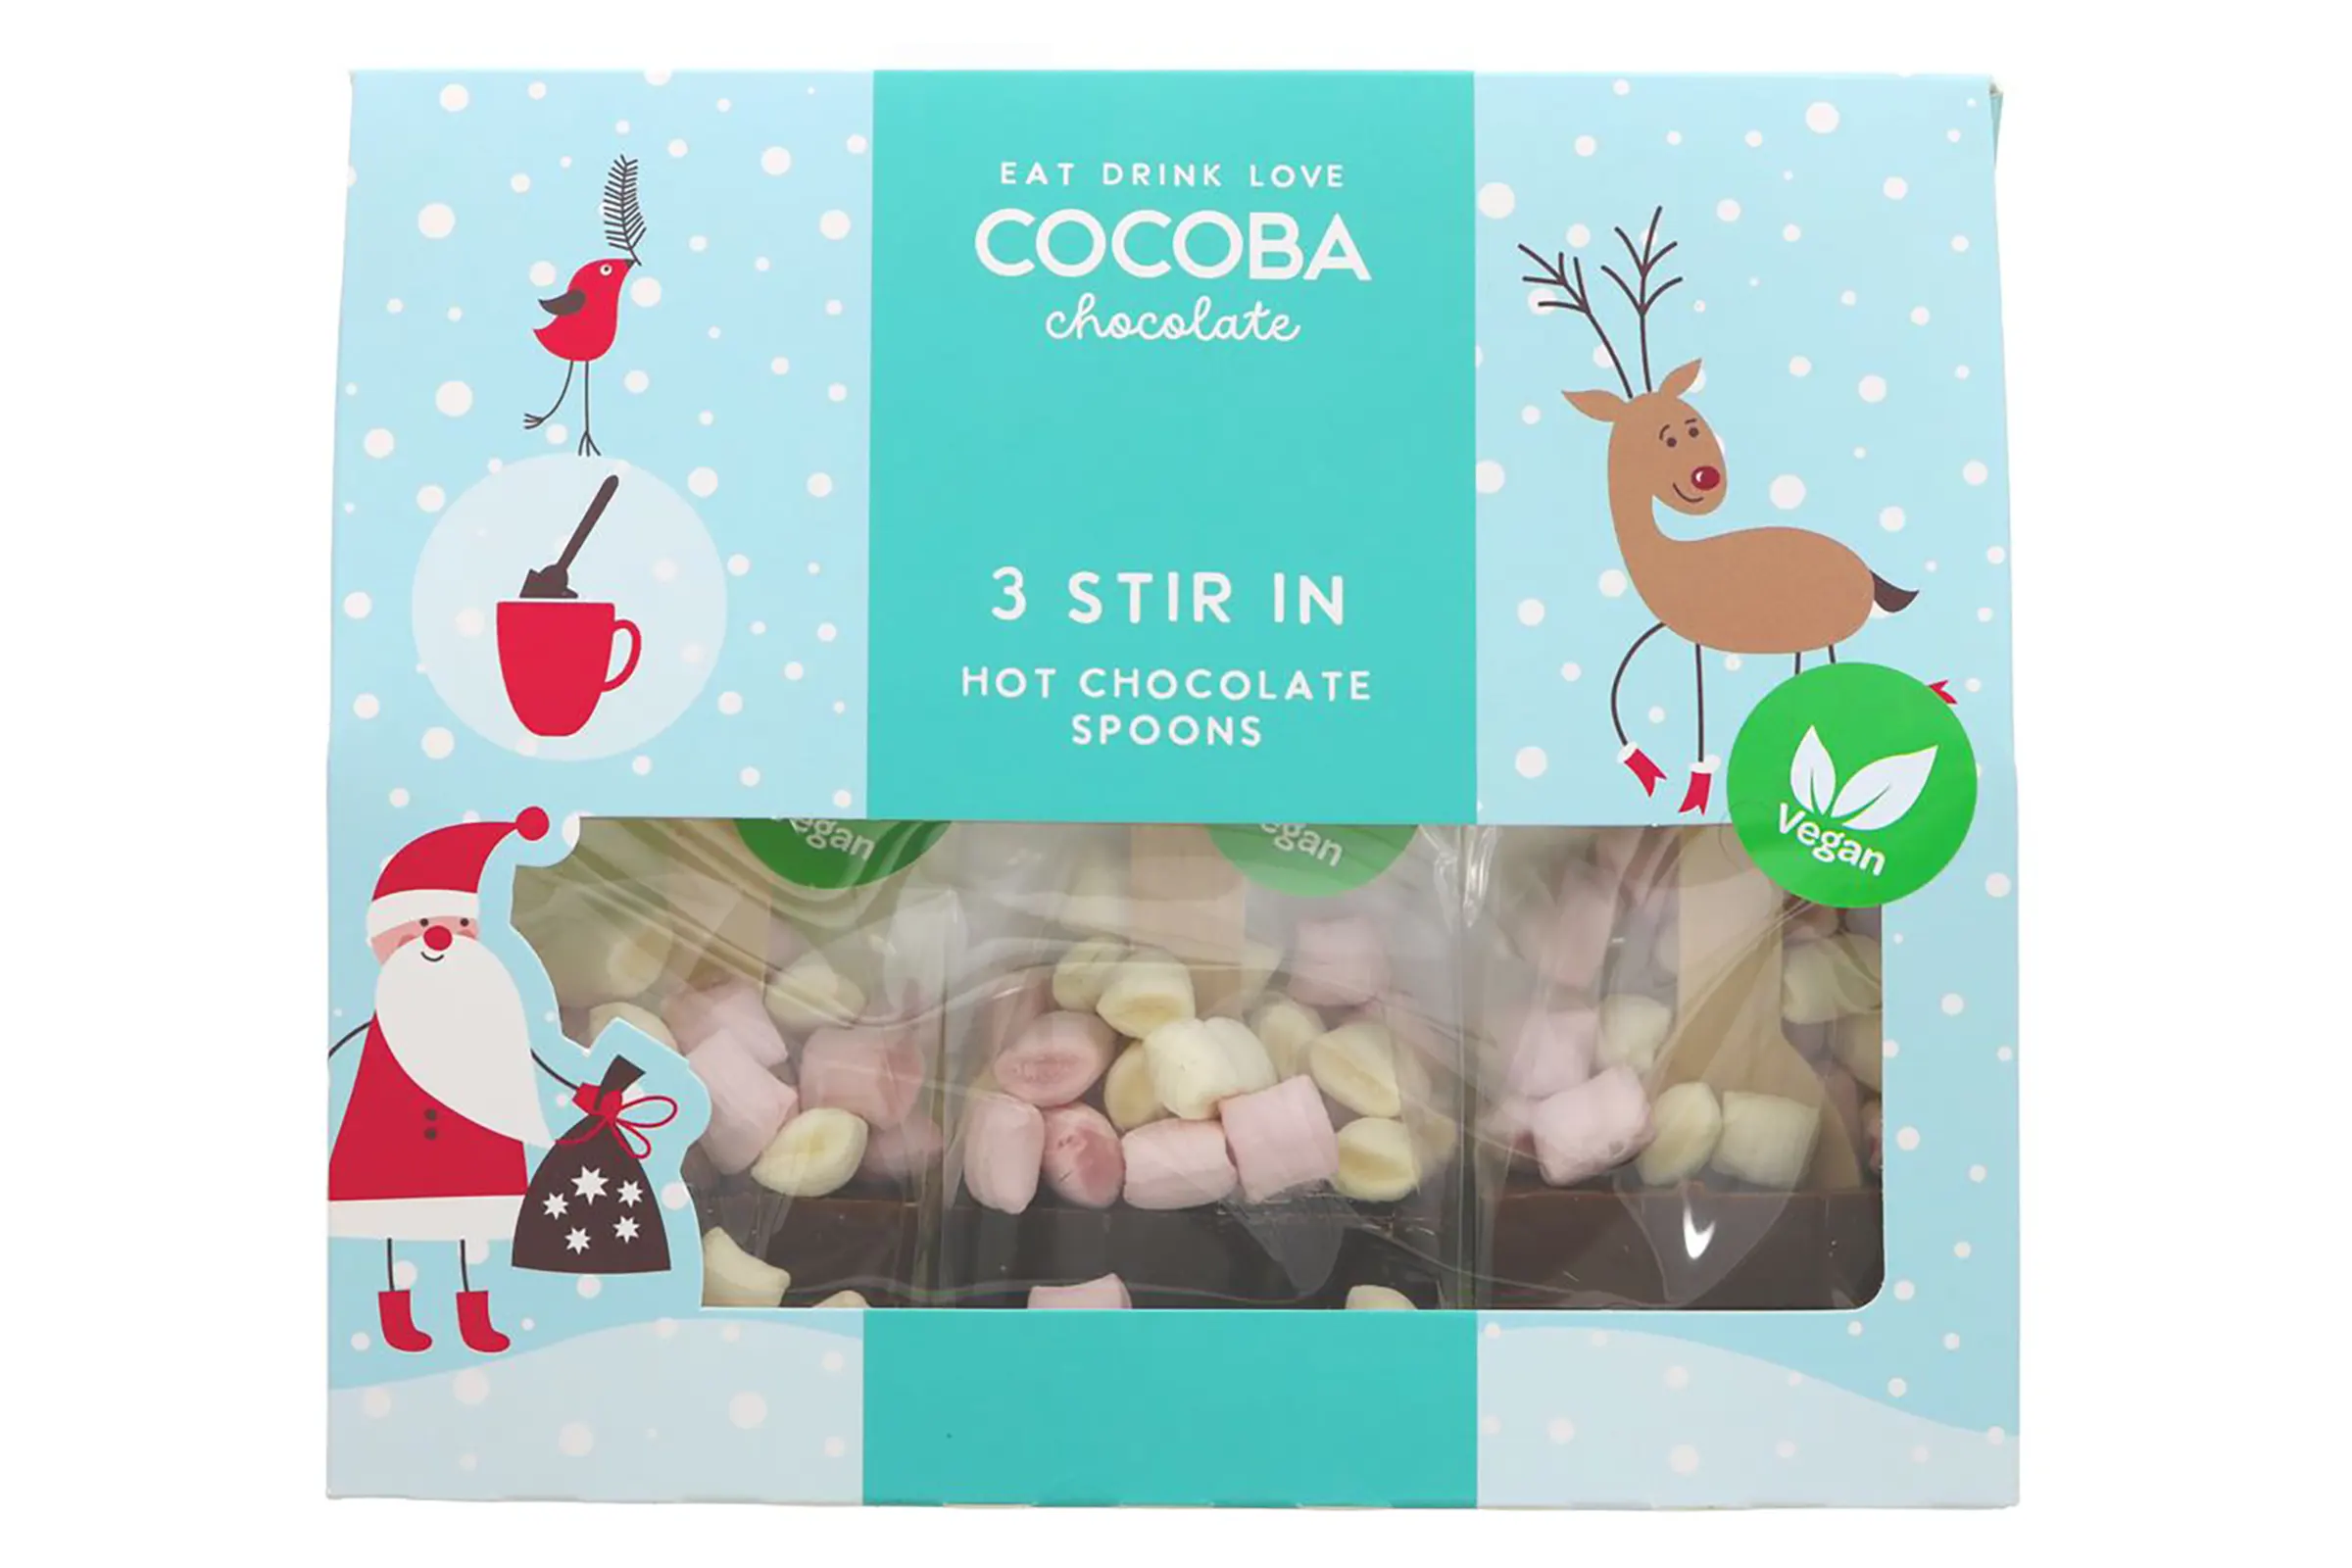 Cocoba Hot Chocolate Products